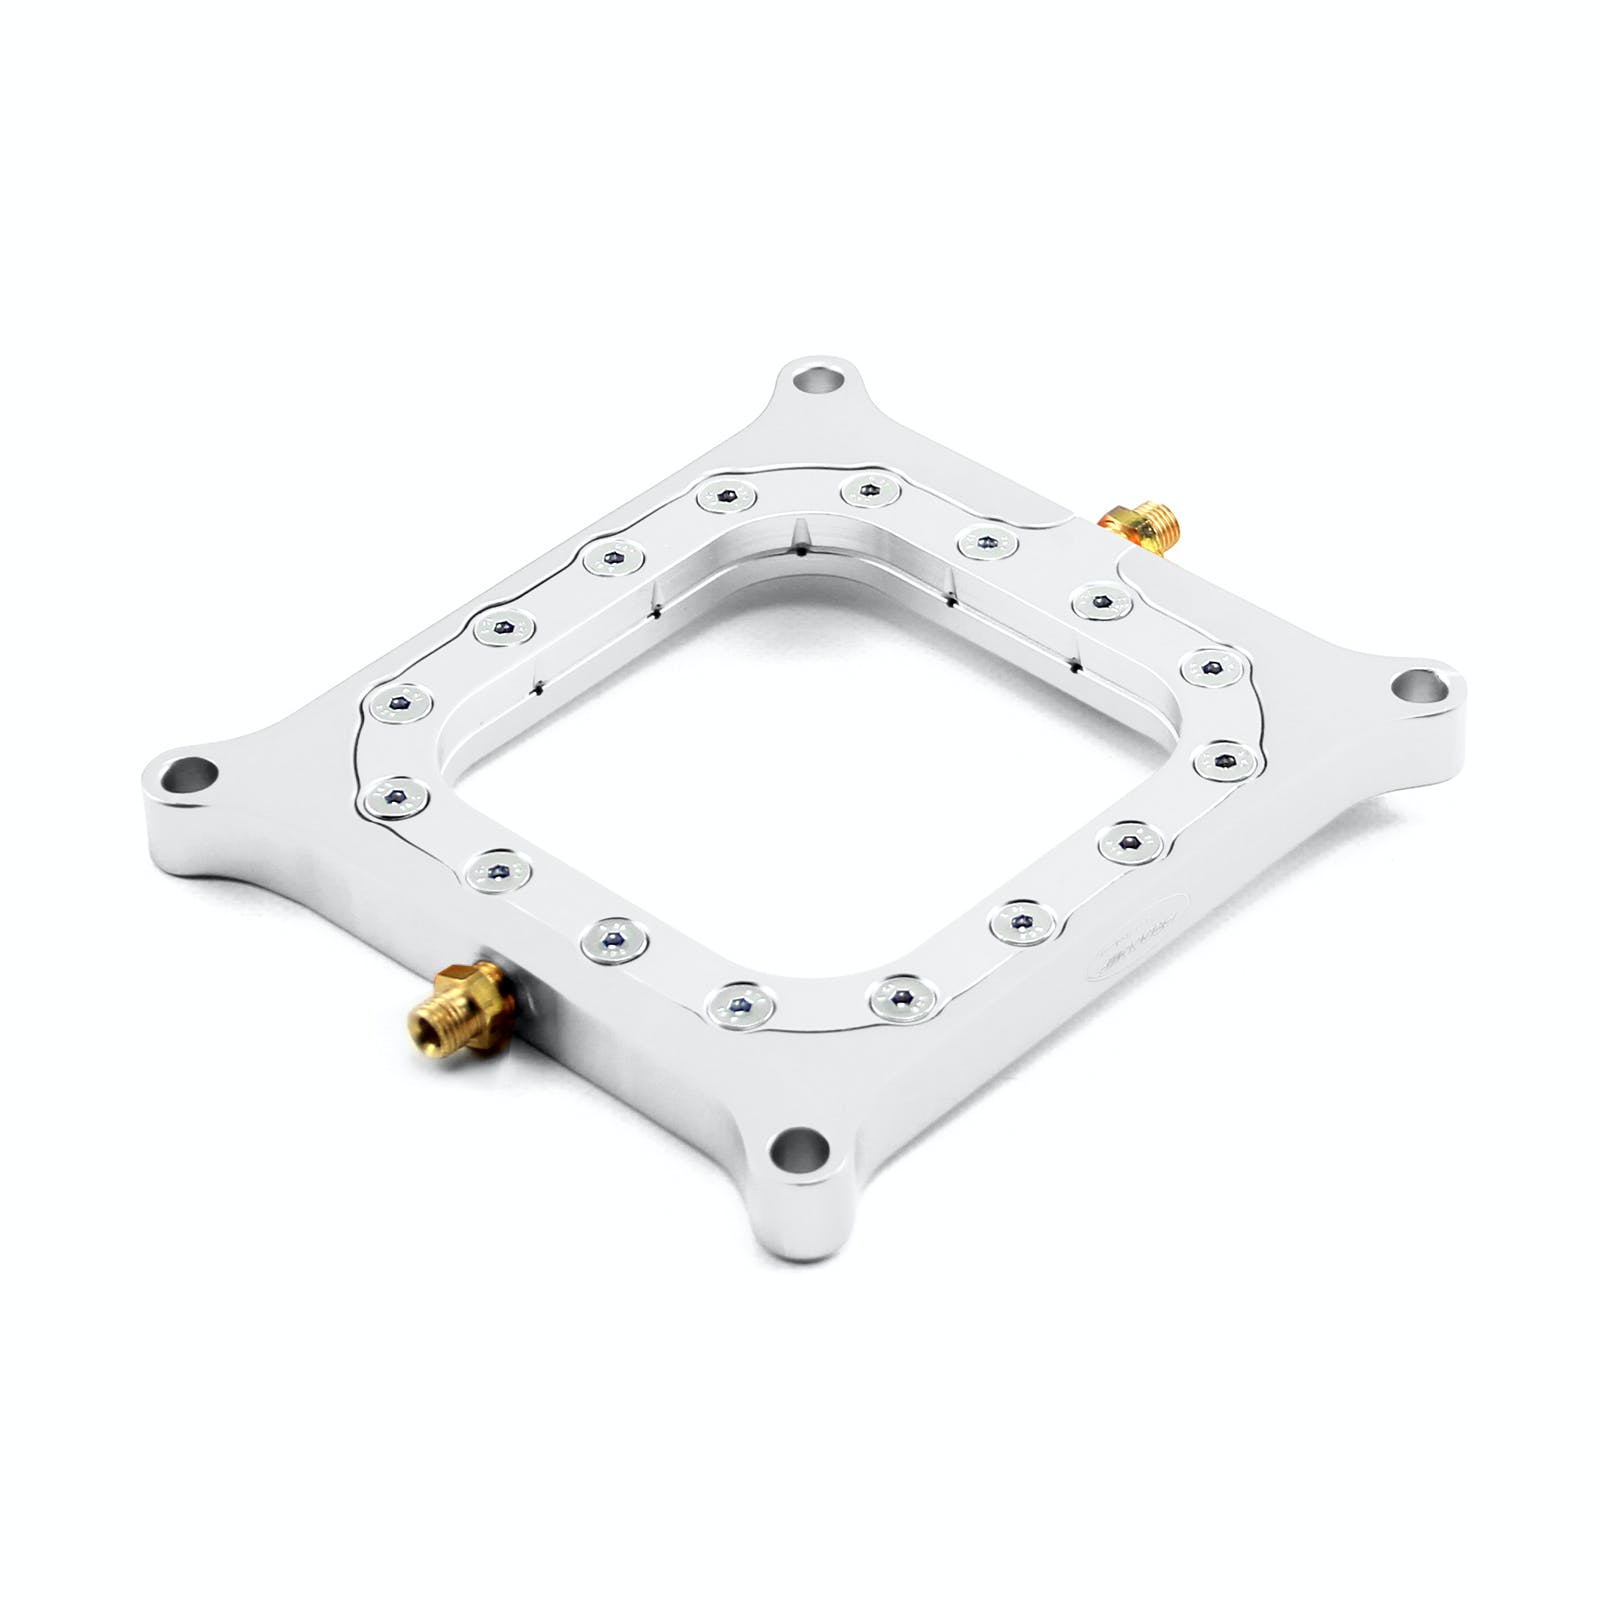 Speedmaster PCE151.1006 Nitrous Oxide 0.500 Polished Billet Square Bore Perimeter Injection Spacer Plate